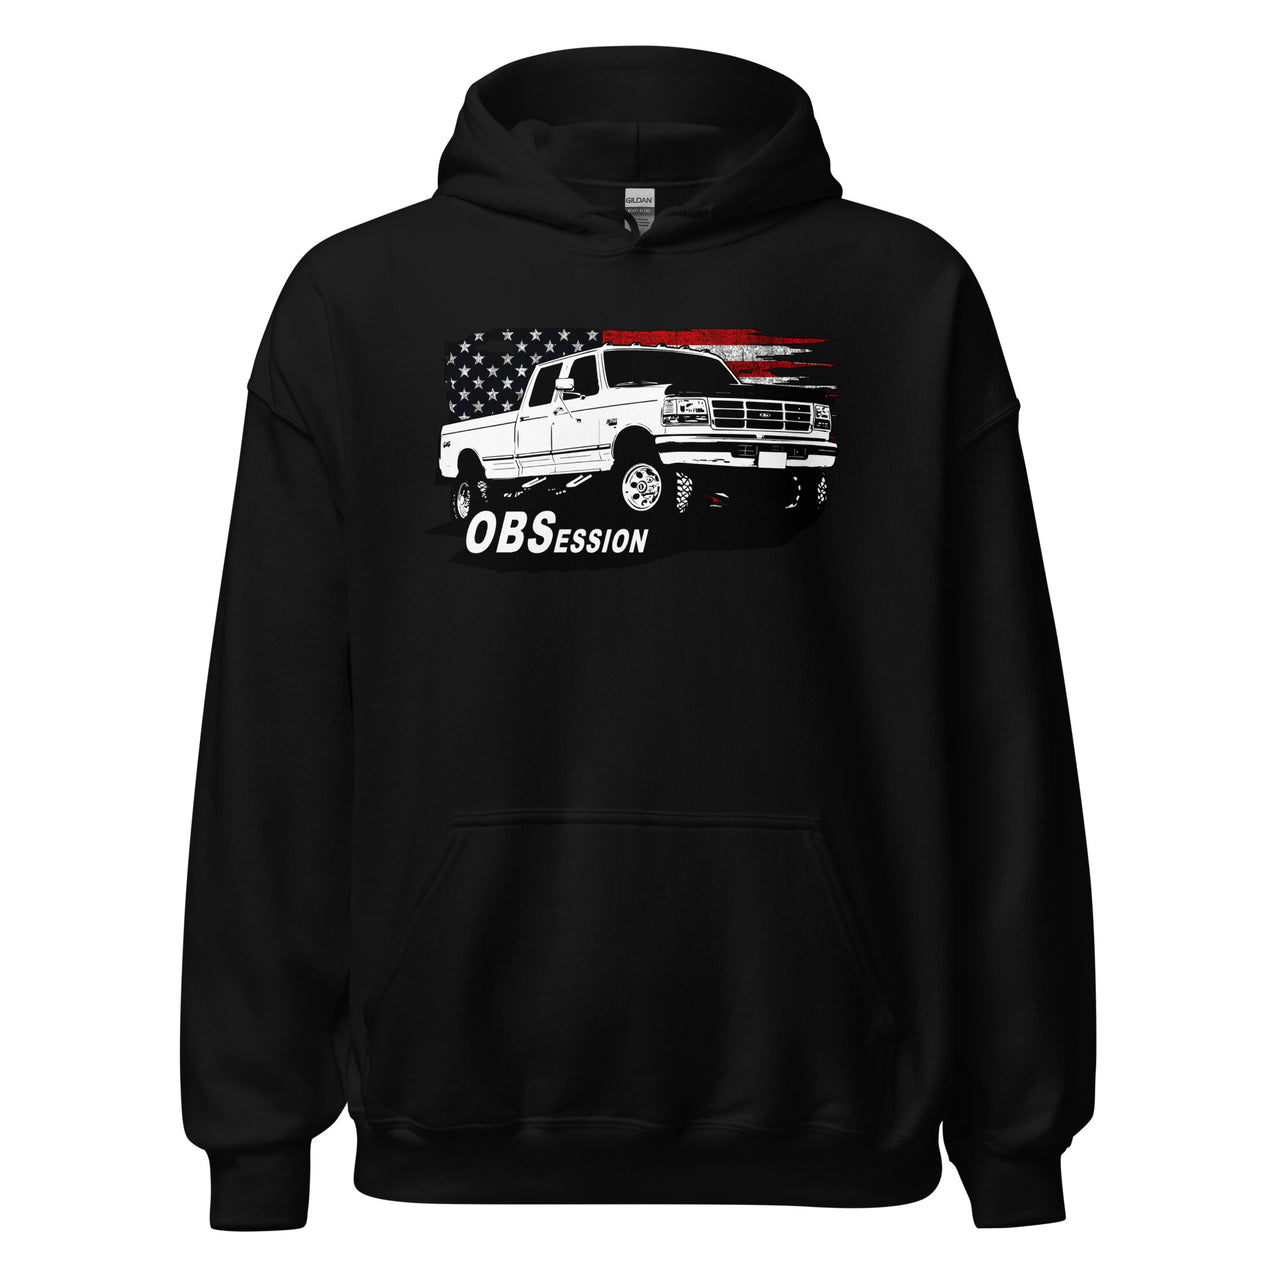 OBS Crew Cab Truck Hoodie with American Flag design - black